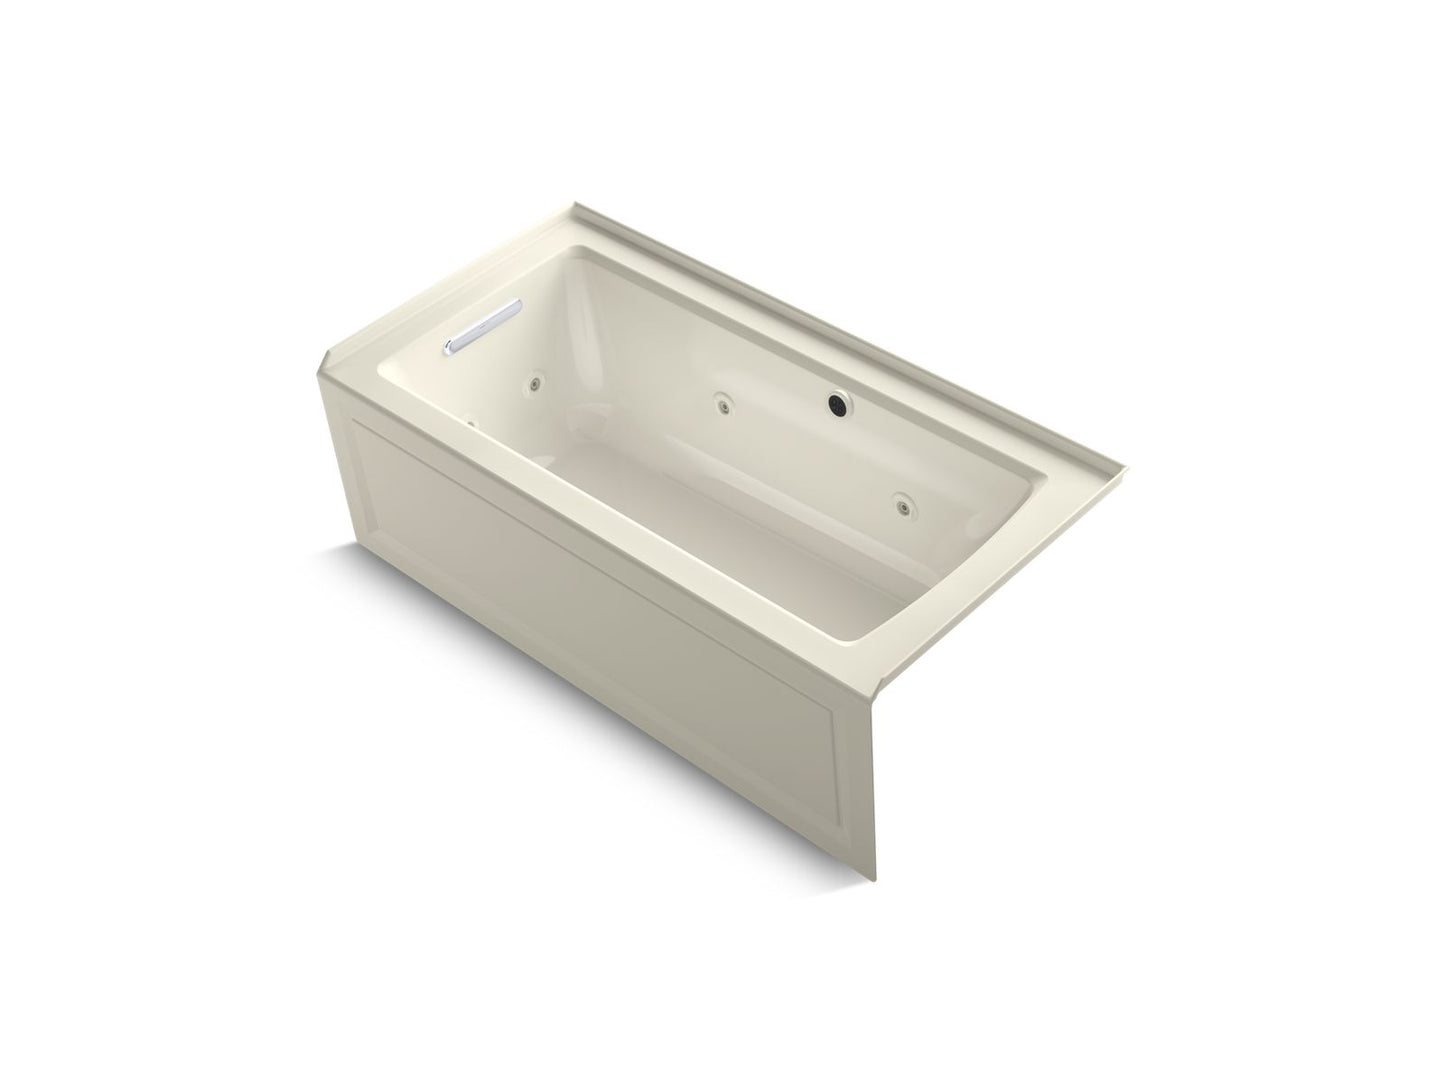 KOHLER K-1947-LAW-96 Archer 60" X 30" Alcove Whirlpool Bath With Bask Heated Surface, Left Drain In Biscuit